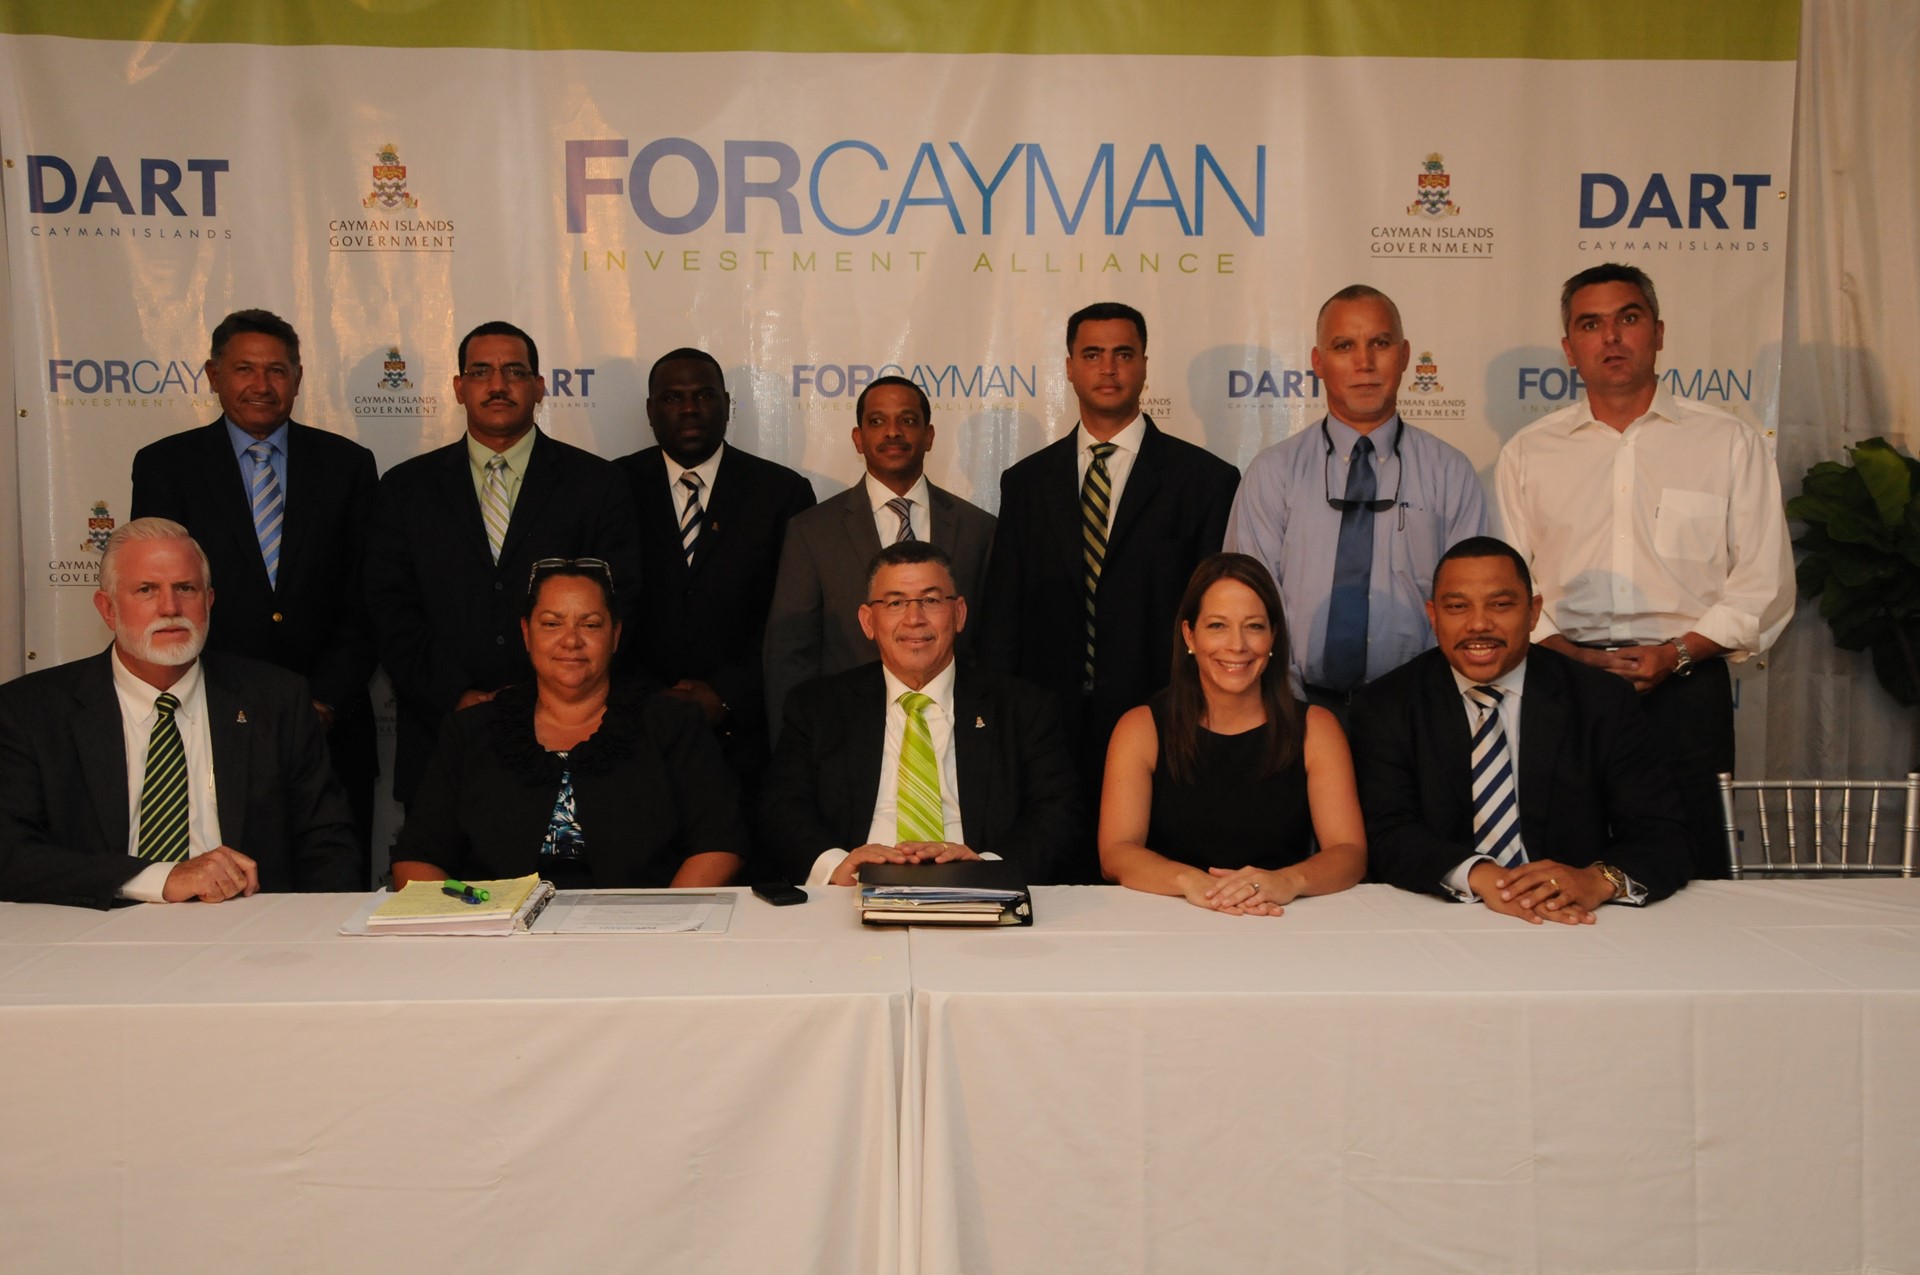 For Cayman Investment Alliance